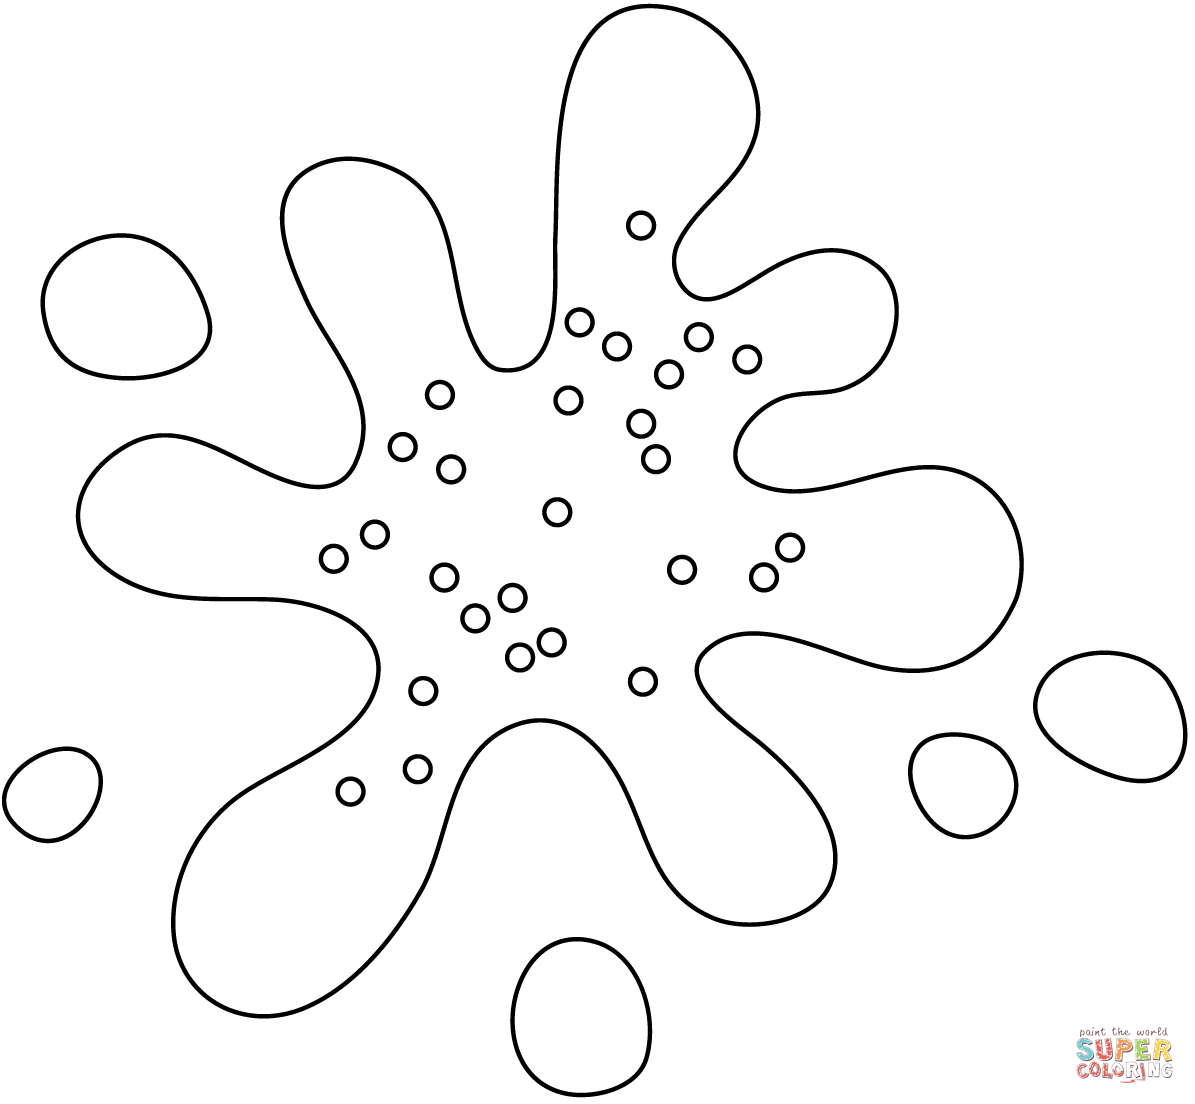 Slime coloring page | Free Printable Coloring Pages